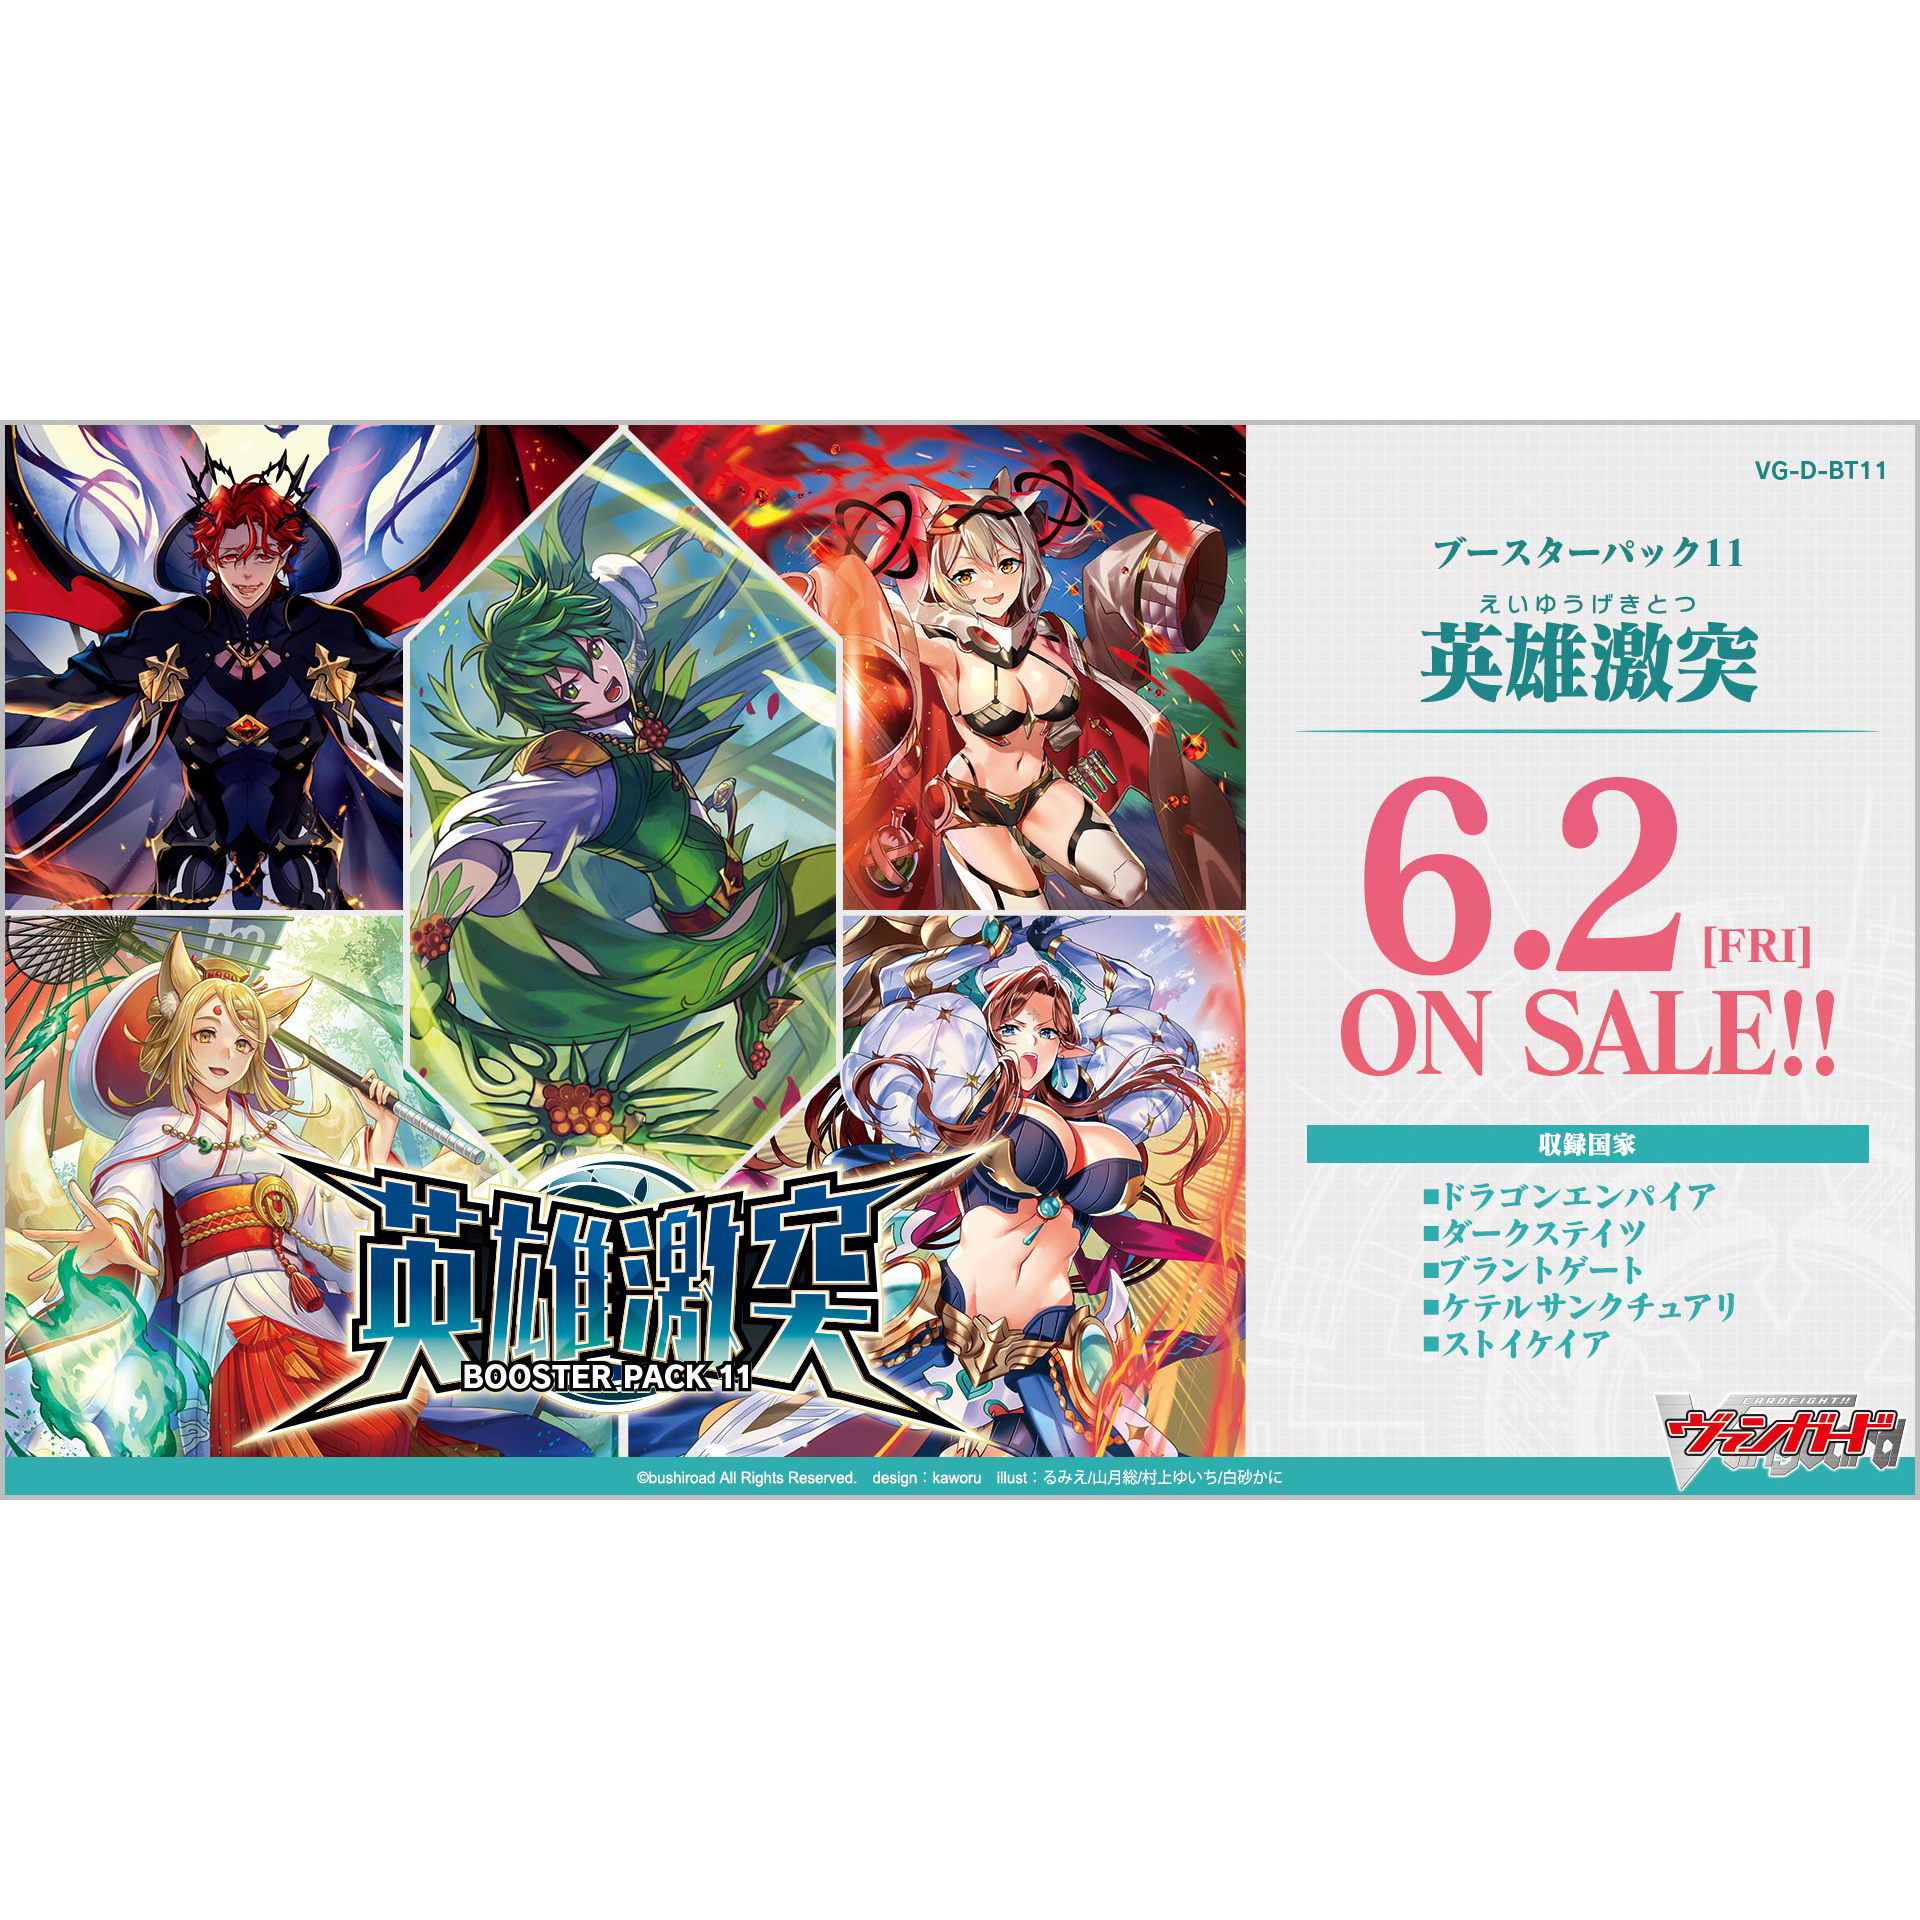 [VG-D-BT11] CARDFIGHT!! Vanguard Booster Pack 11 ｢Clash of the Heroes｣ Box